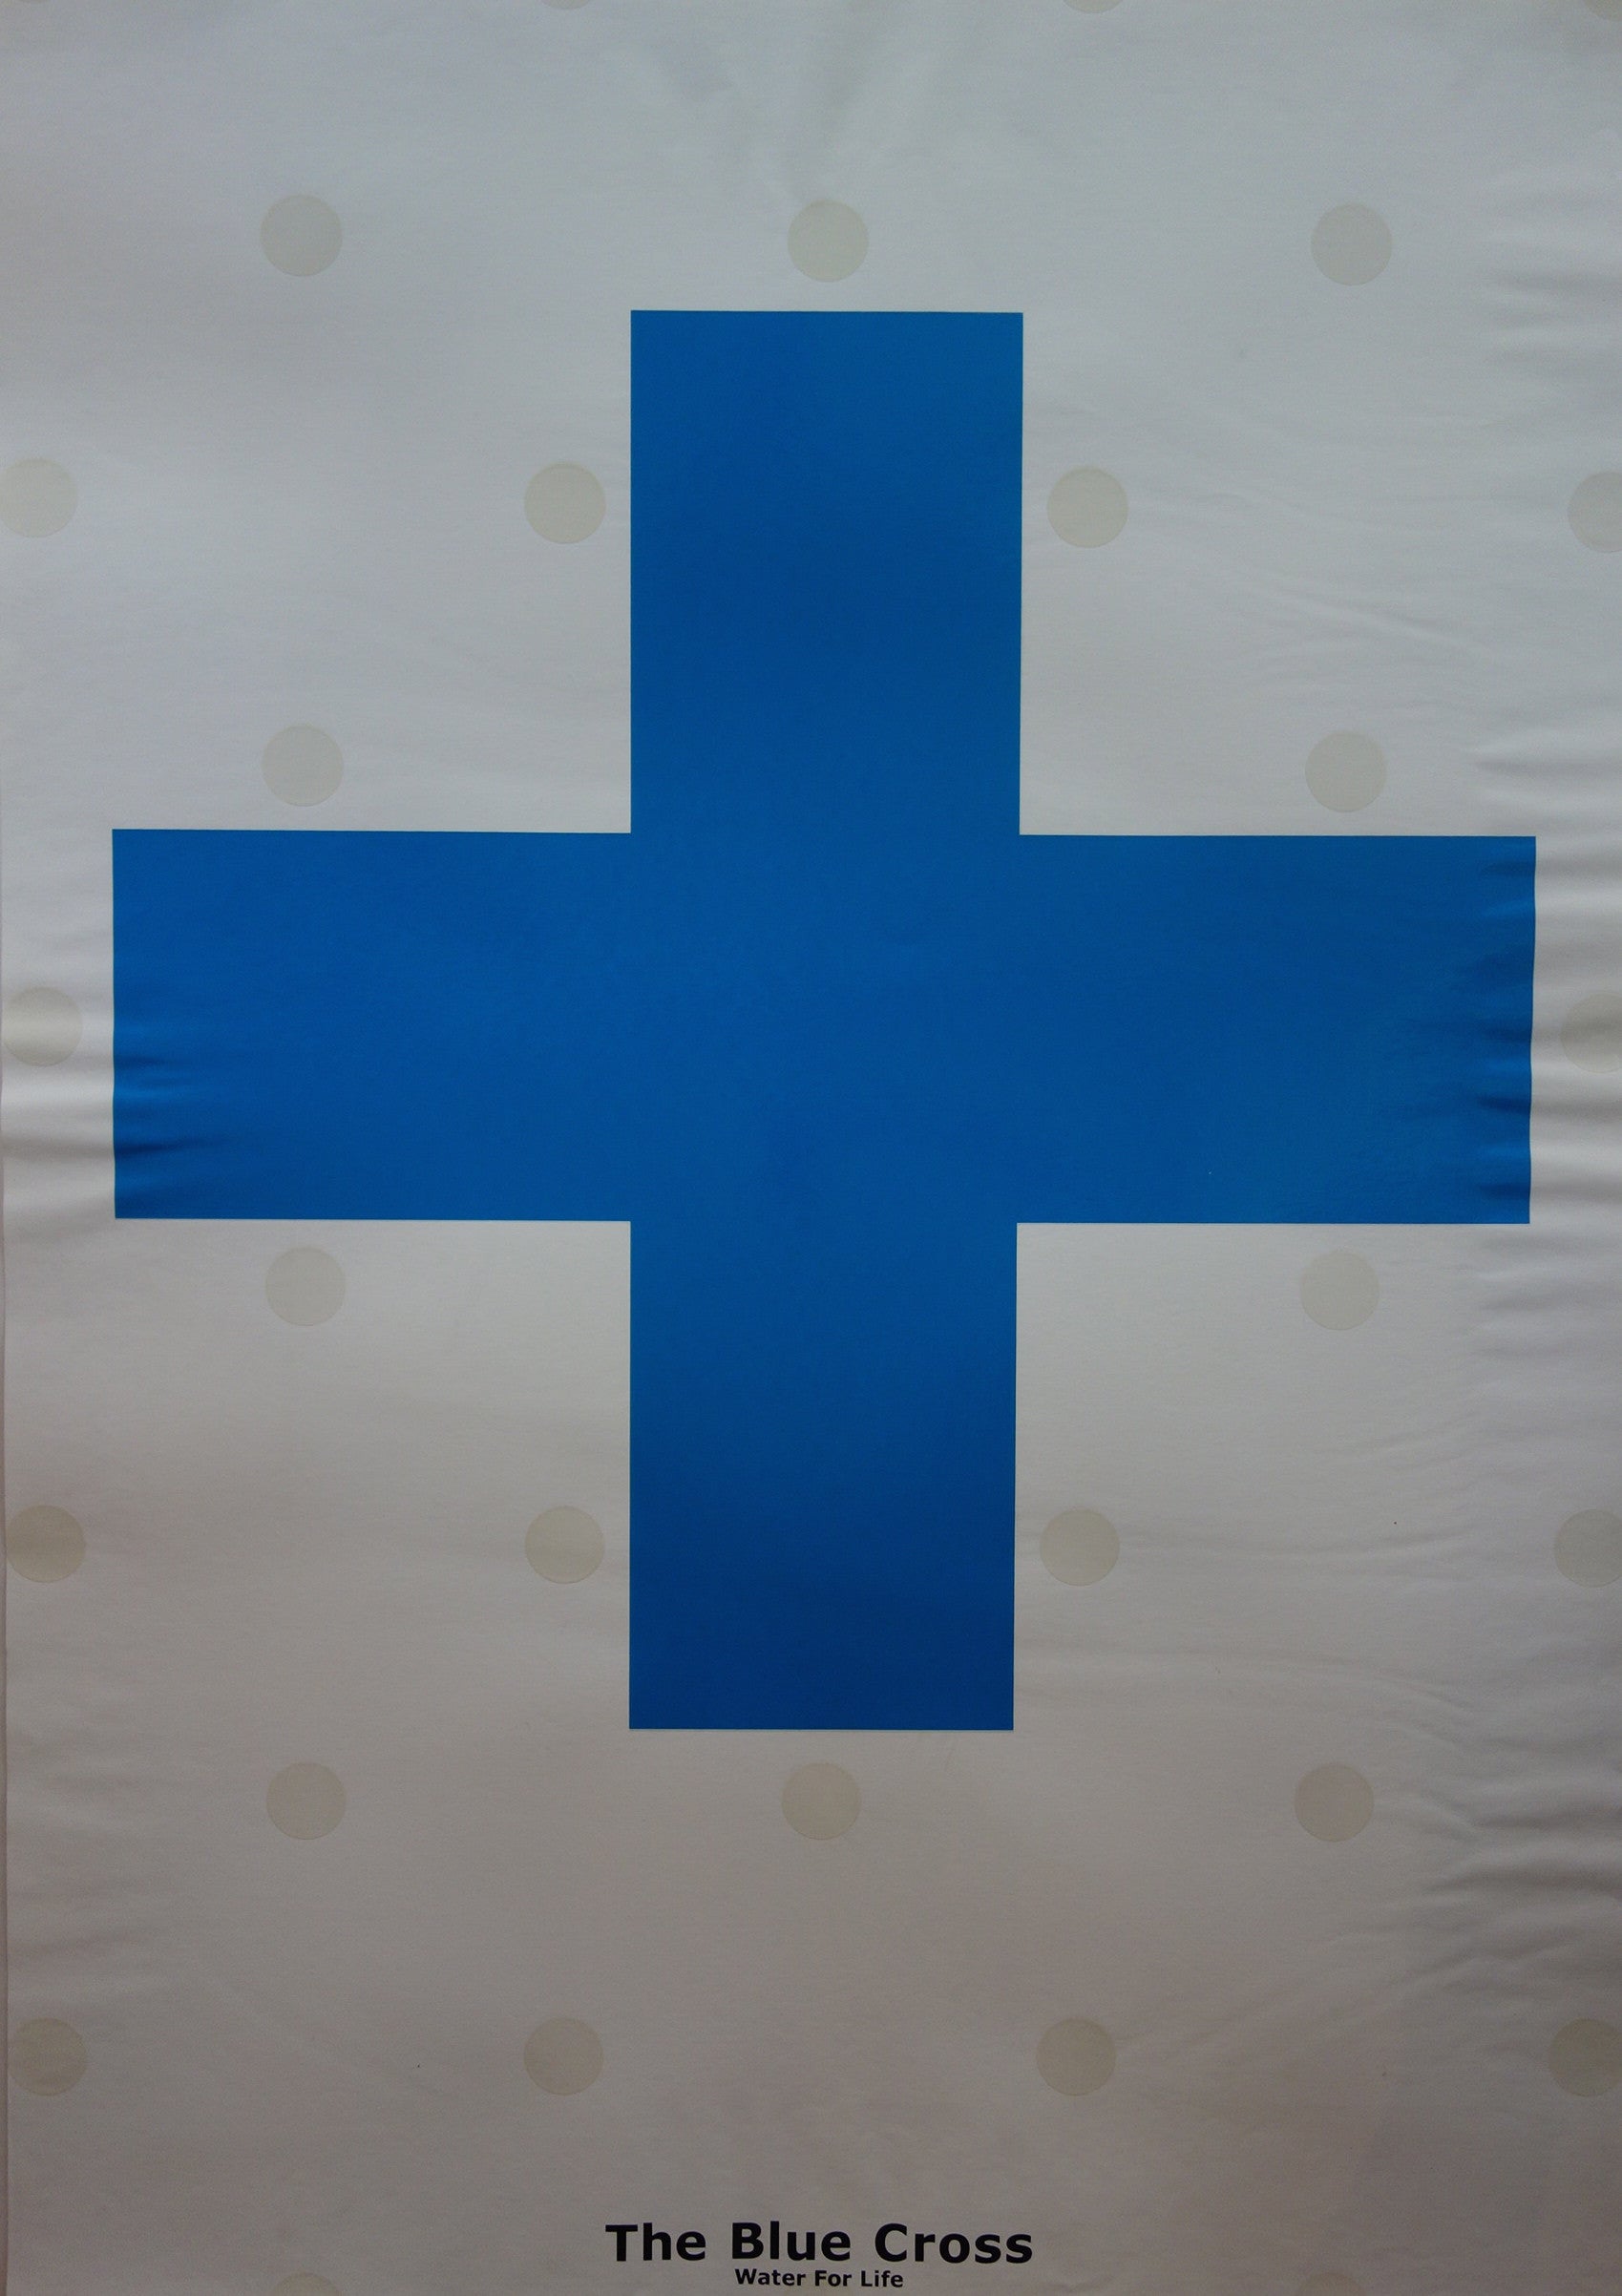 The Blue Cross, Water For Life